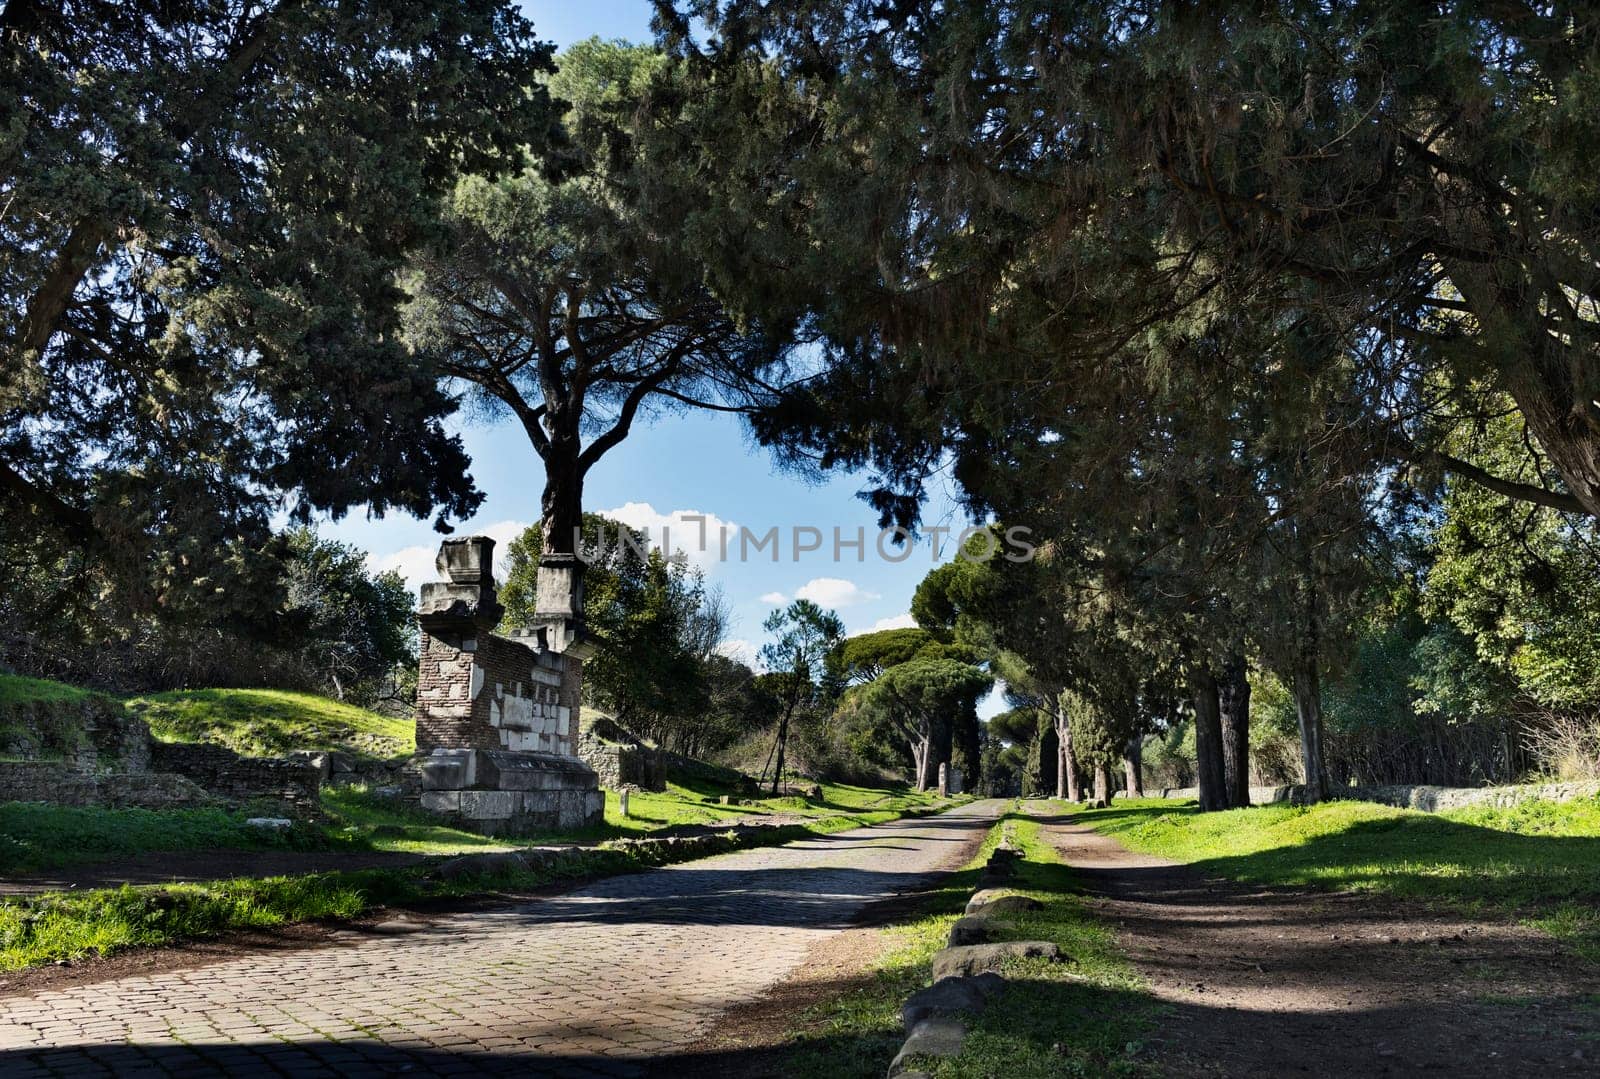 Italy , Rome , the Appian Way -Via Appia - one of the most important Roman roads of the ancient republic